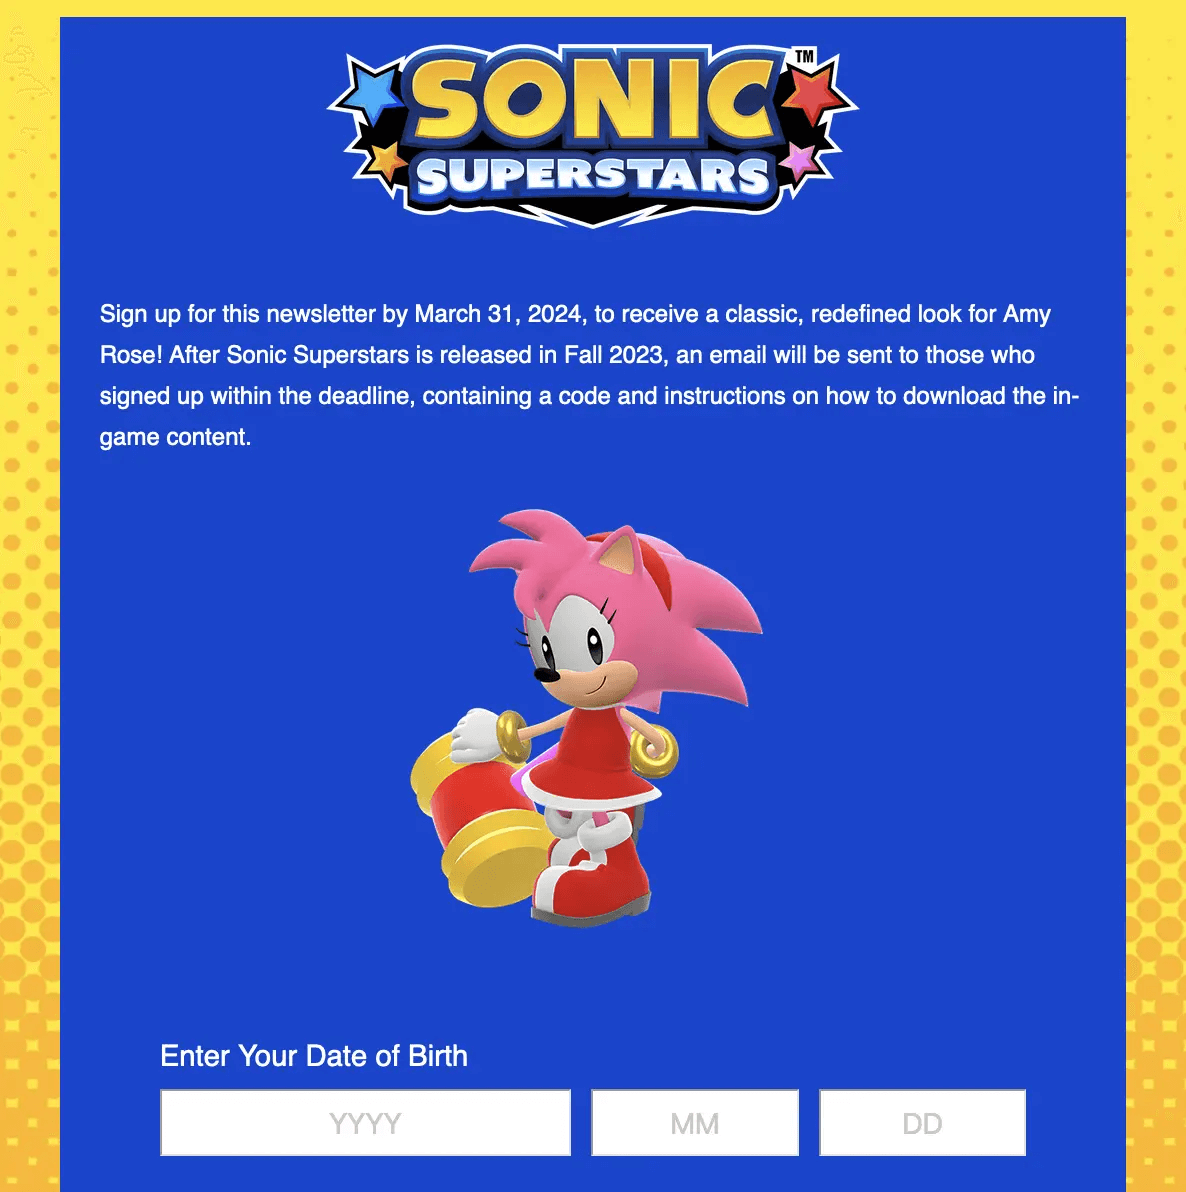 Sonic Superstars subscription form that invites people to subscribe to a newsletter and offers an in-game character’s classic look in return